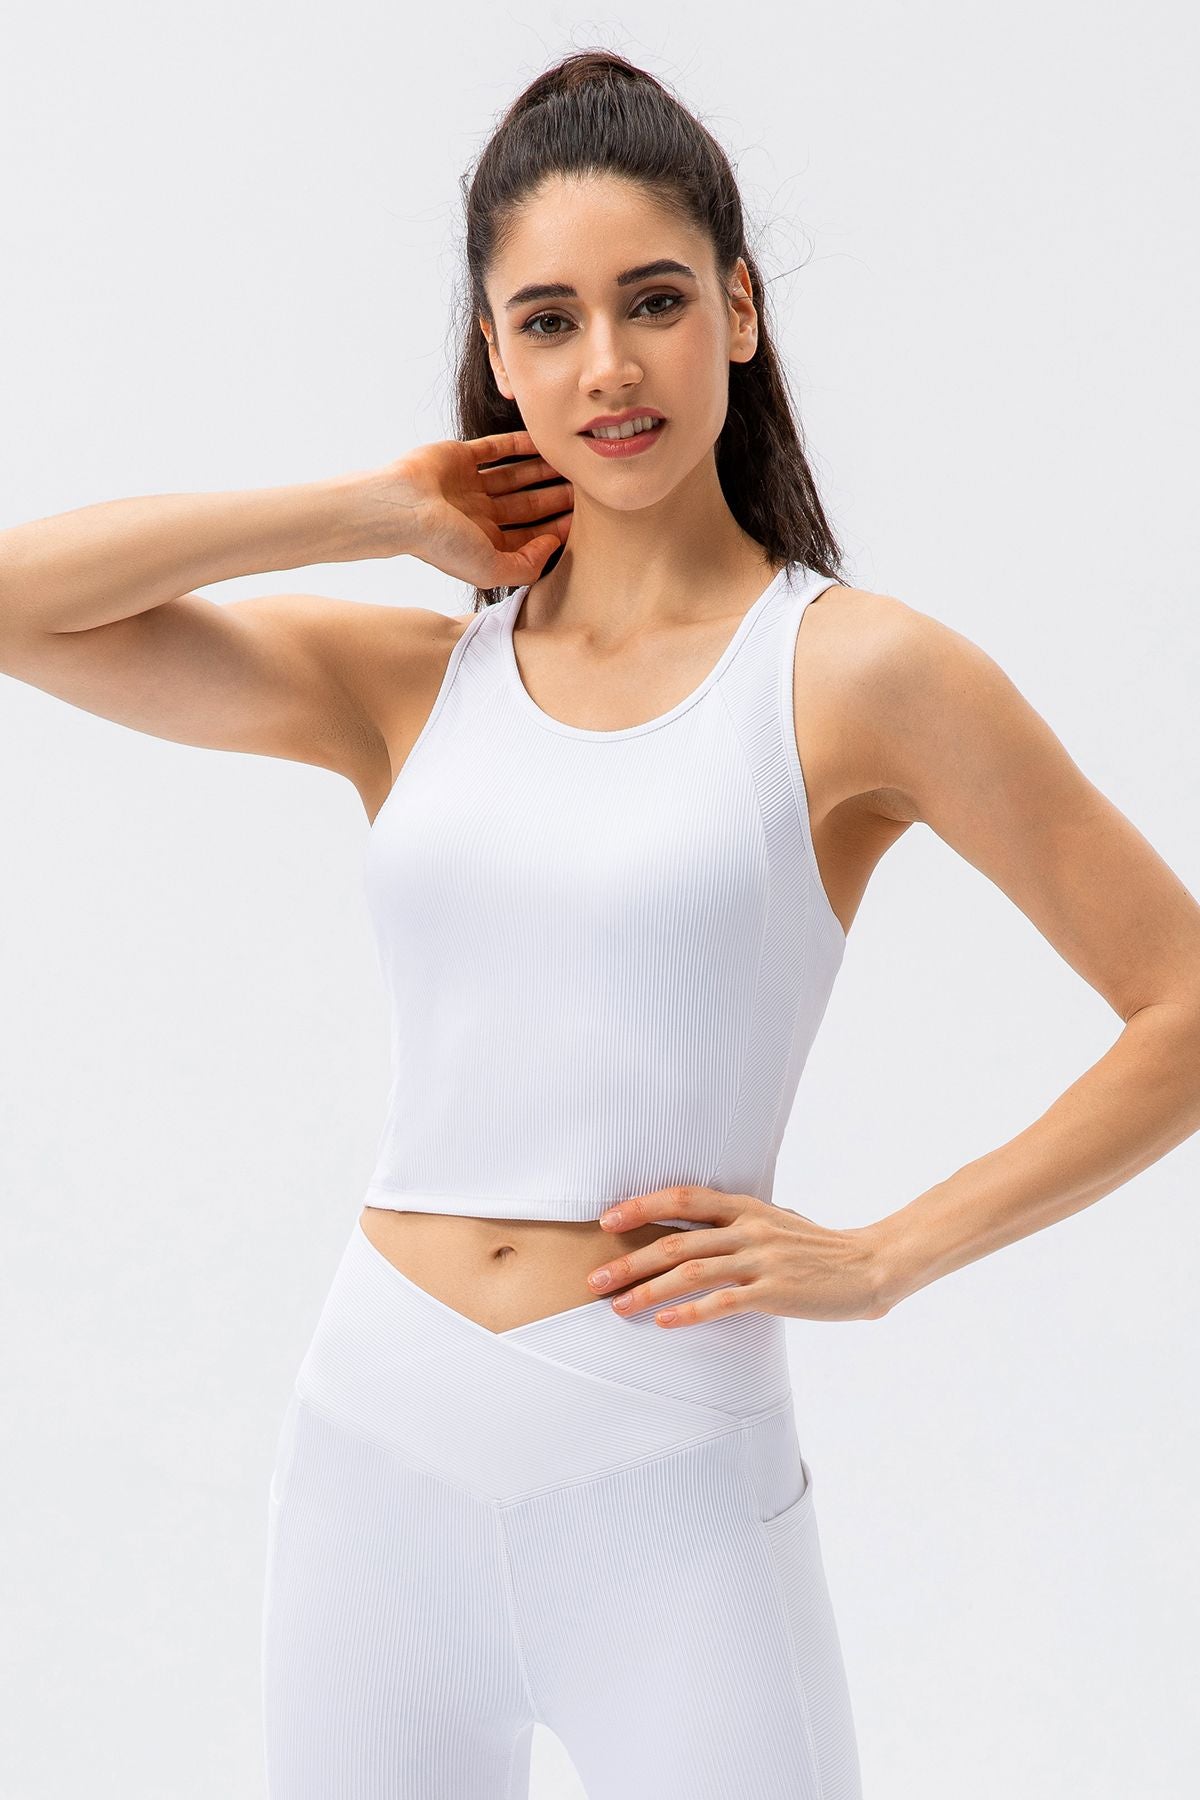 Fashion Women Crop Tank With Shelf Built In Bra Workout Top With Removable  Padding Longline Sports Bra For Lounging Creamy White